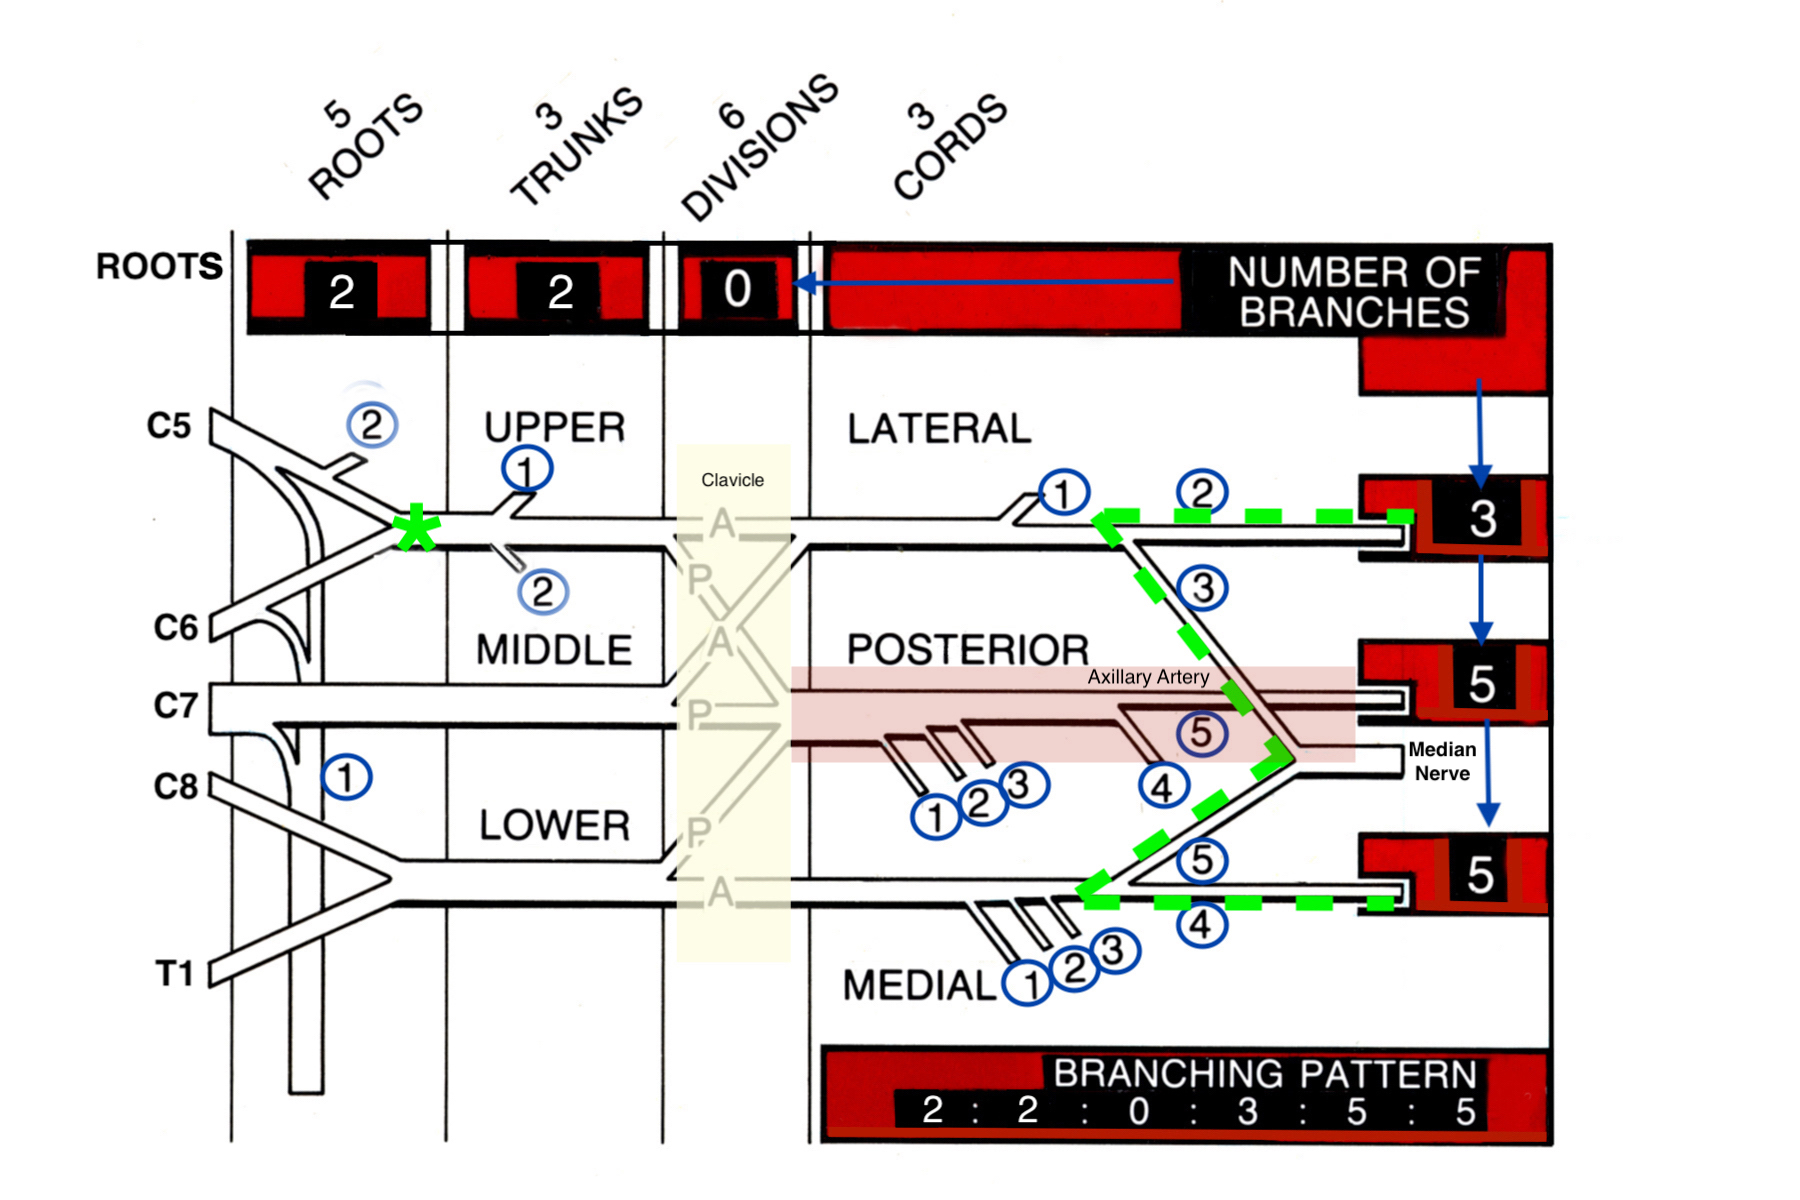 Brachial Plexus diagram showing roots, trunks, divisions & cords. (Remember RTDCBs - Running Together Down Country Byways). Also note the Nerve Branching  2 2 0 3 5 5 Rule for the number of branches from each part of the plexus. Also see the brachial plexus branching table in the next image. Note the green asterisk at Erb’s point.  Also note the brachial plexus “M” landmark shape anterior to the axillary artery which is defined by the musculocutaneous nerve, the median nerve and the ulnar nerve. Finally not